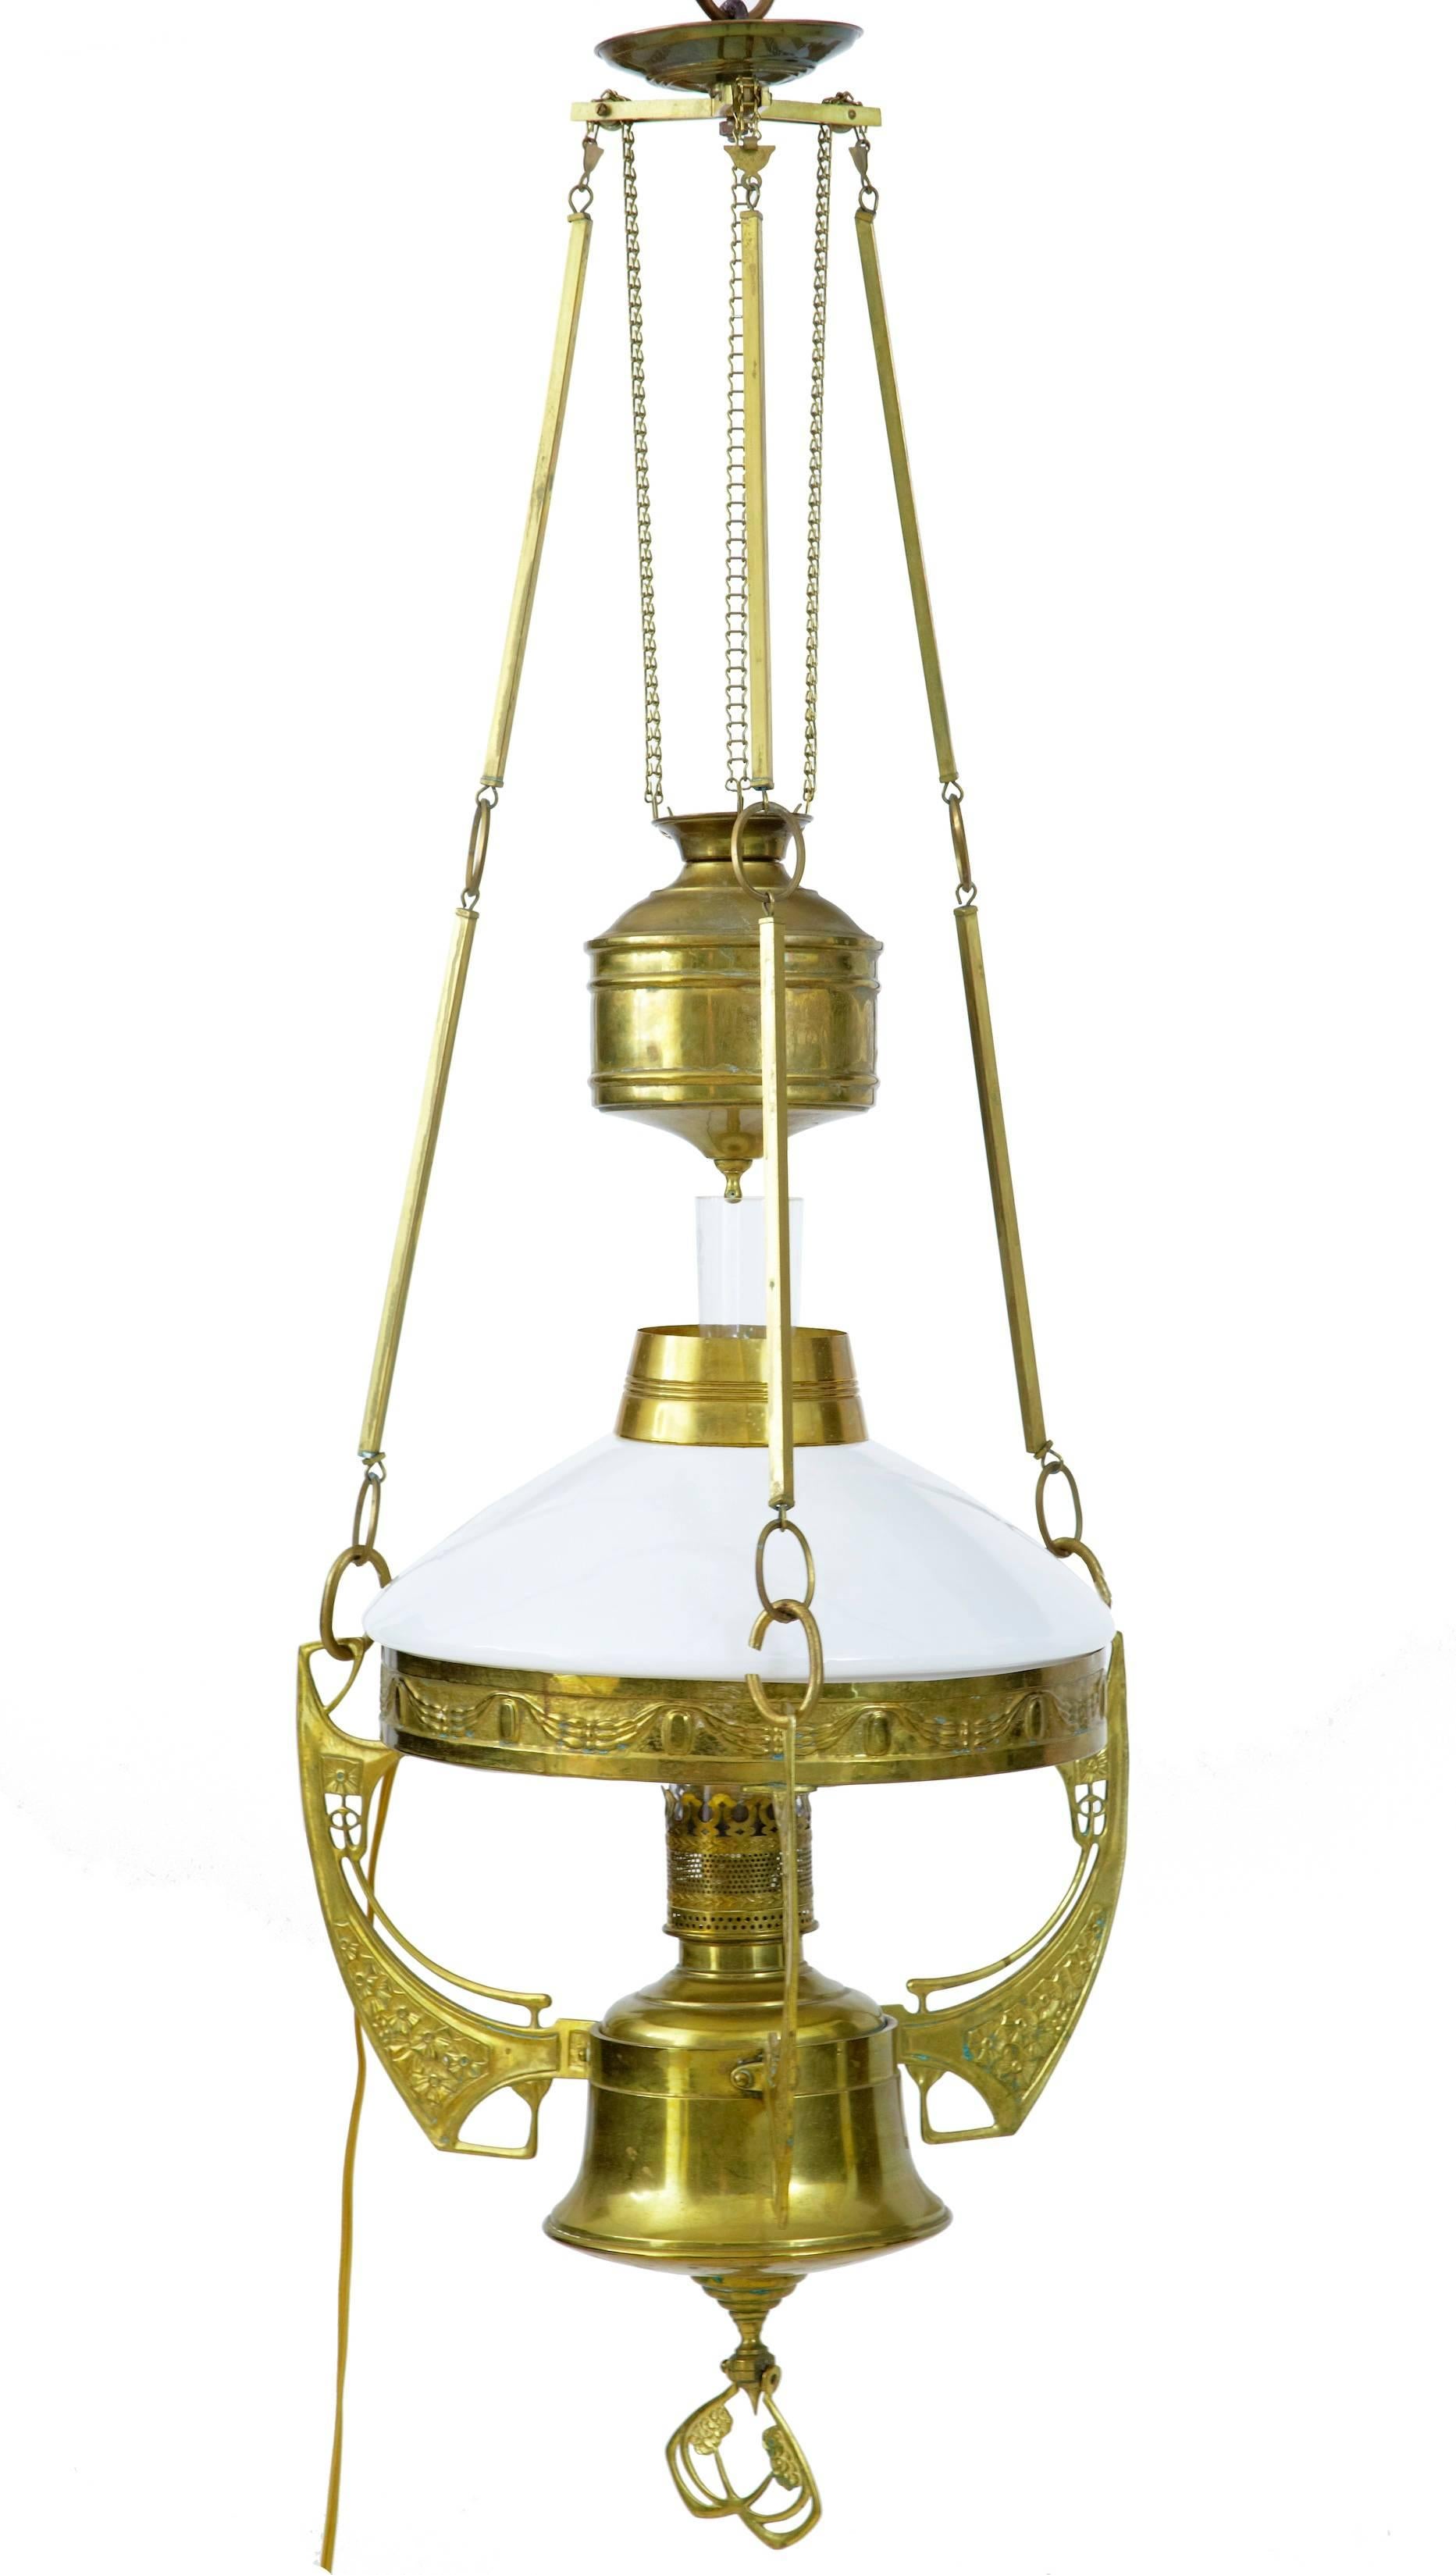 Fine quality arts and crafts brass ceiling light, circa 1900.
Height adjustable which allows a difference of 11 inches.
White opaline glass bowl.
Original oil burner and glass still present, fitted with later electrical fittings.

Measures: